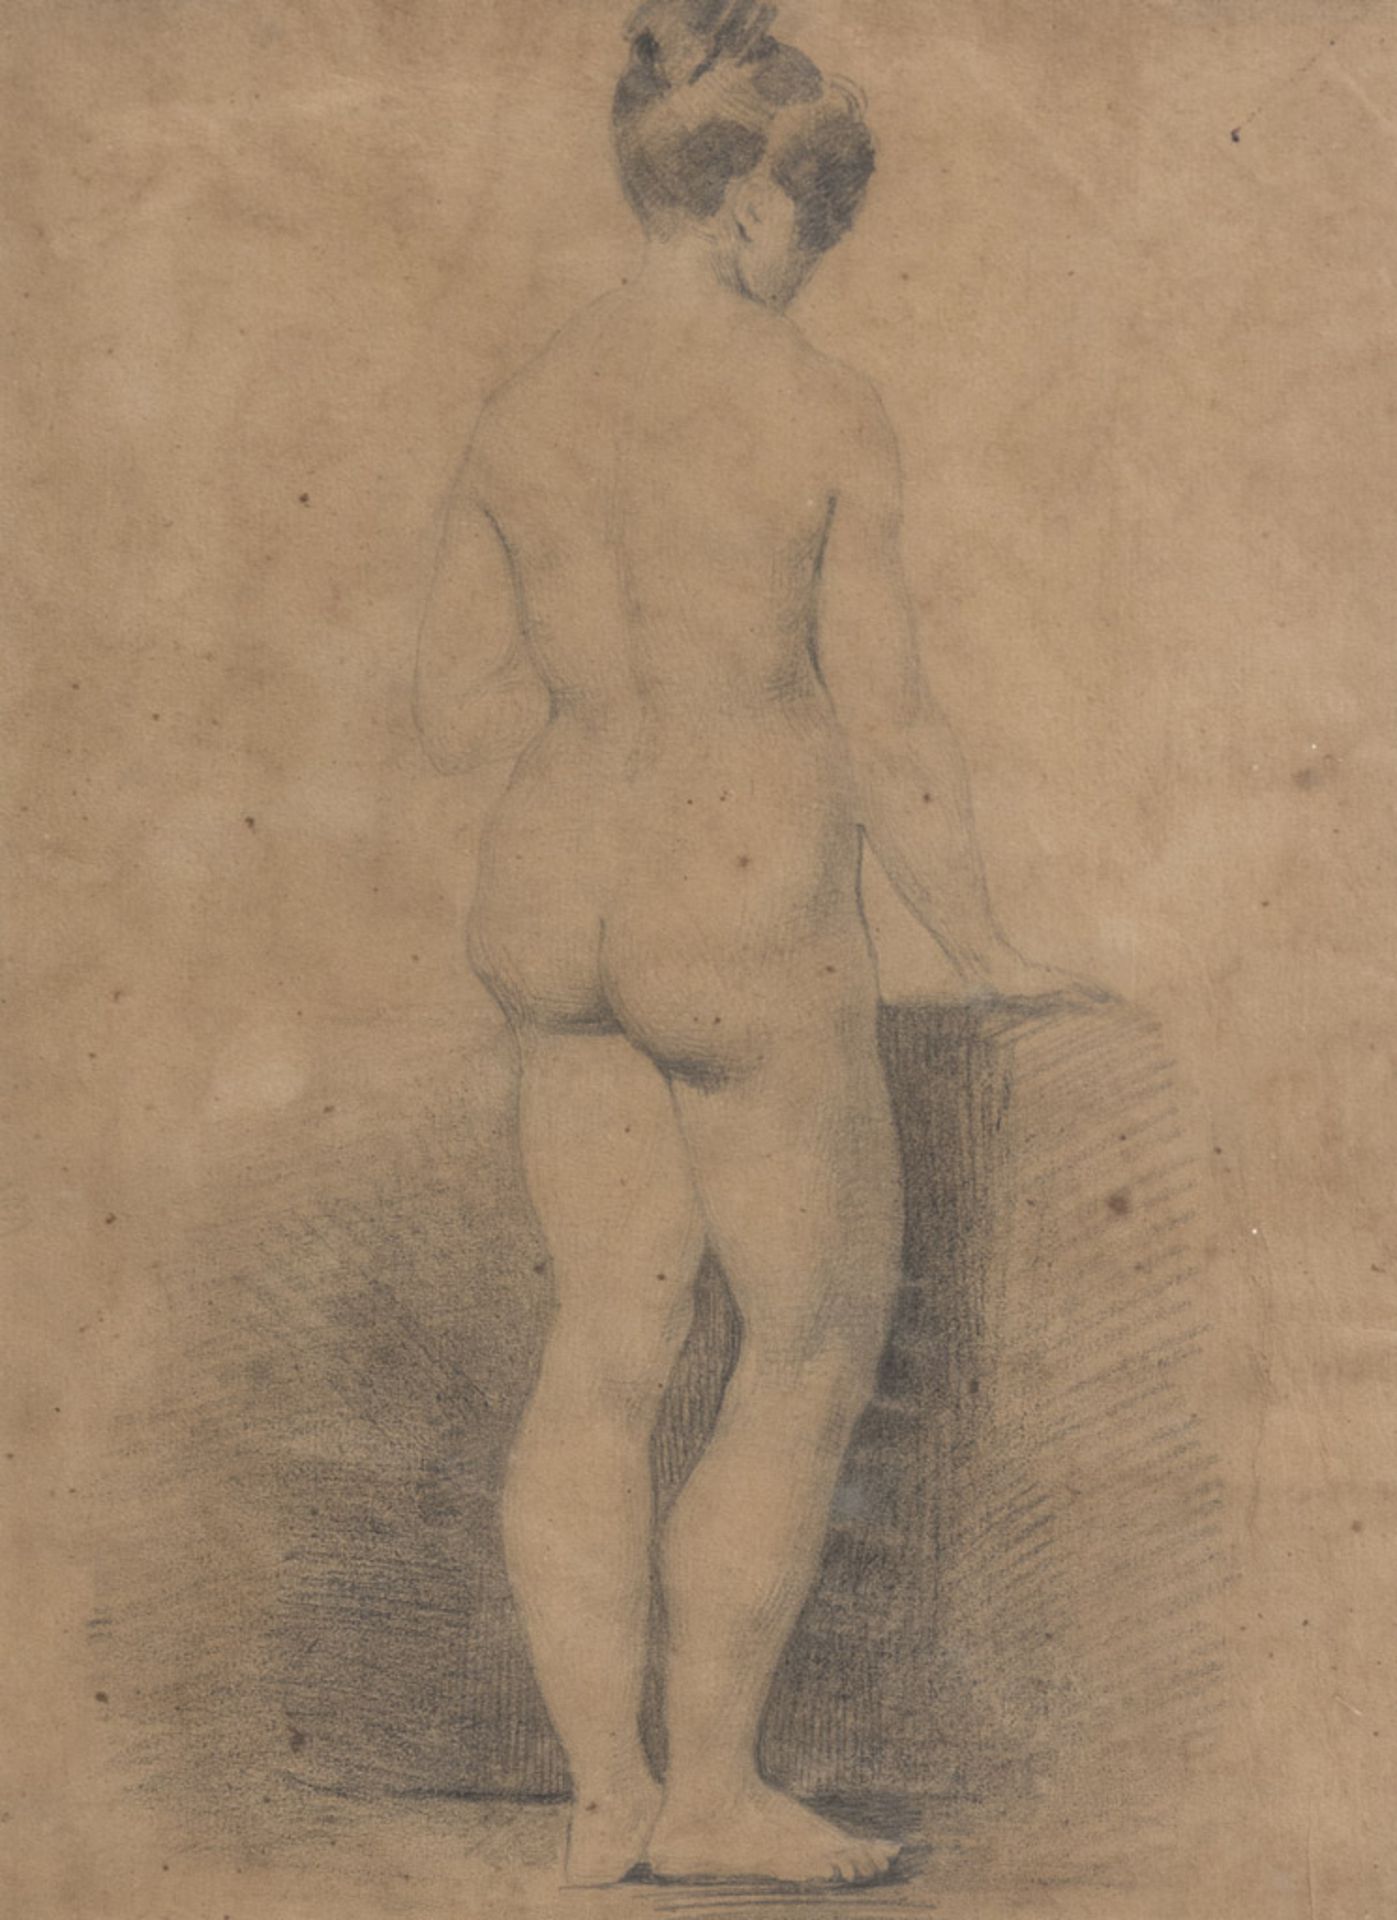 PAINTER EARLY 20TH CENTURY STUDY OF NUDE Pencil on paper, cm. 28 x 20 Not signed Framed PITTORE